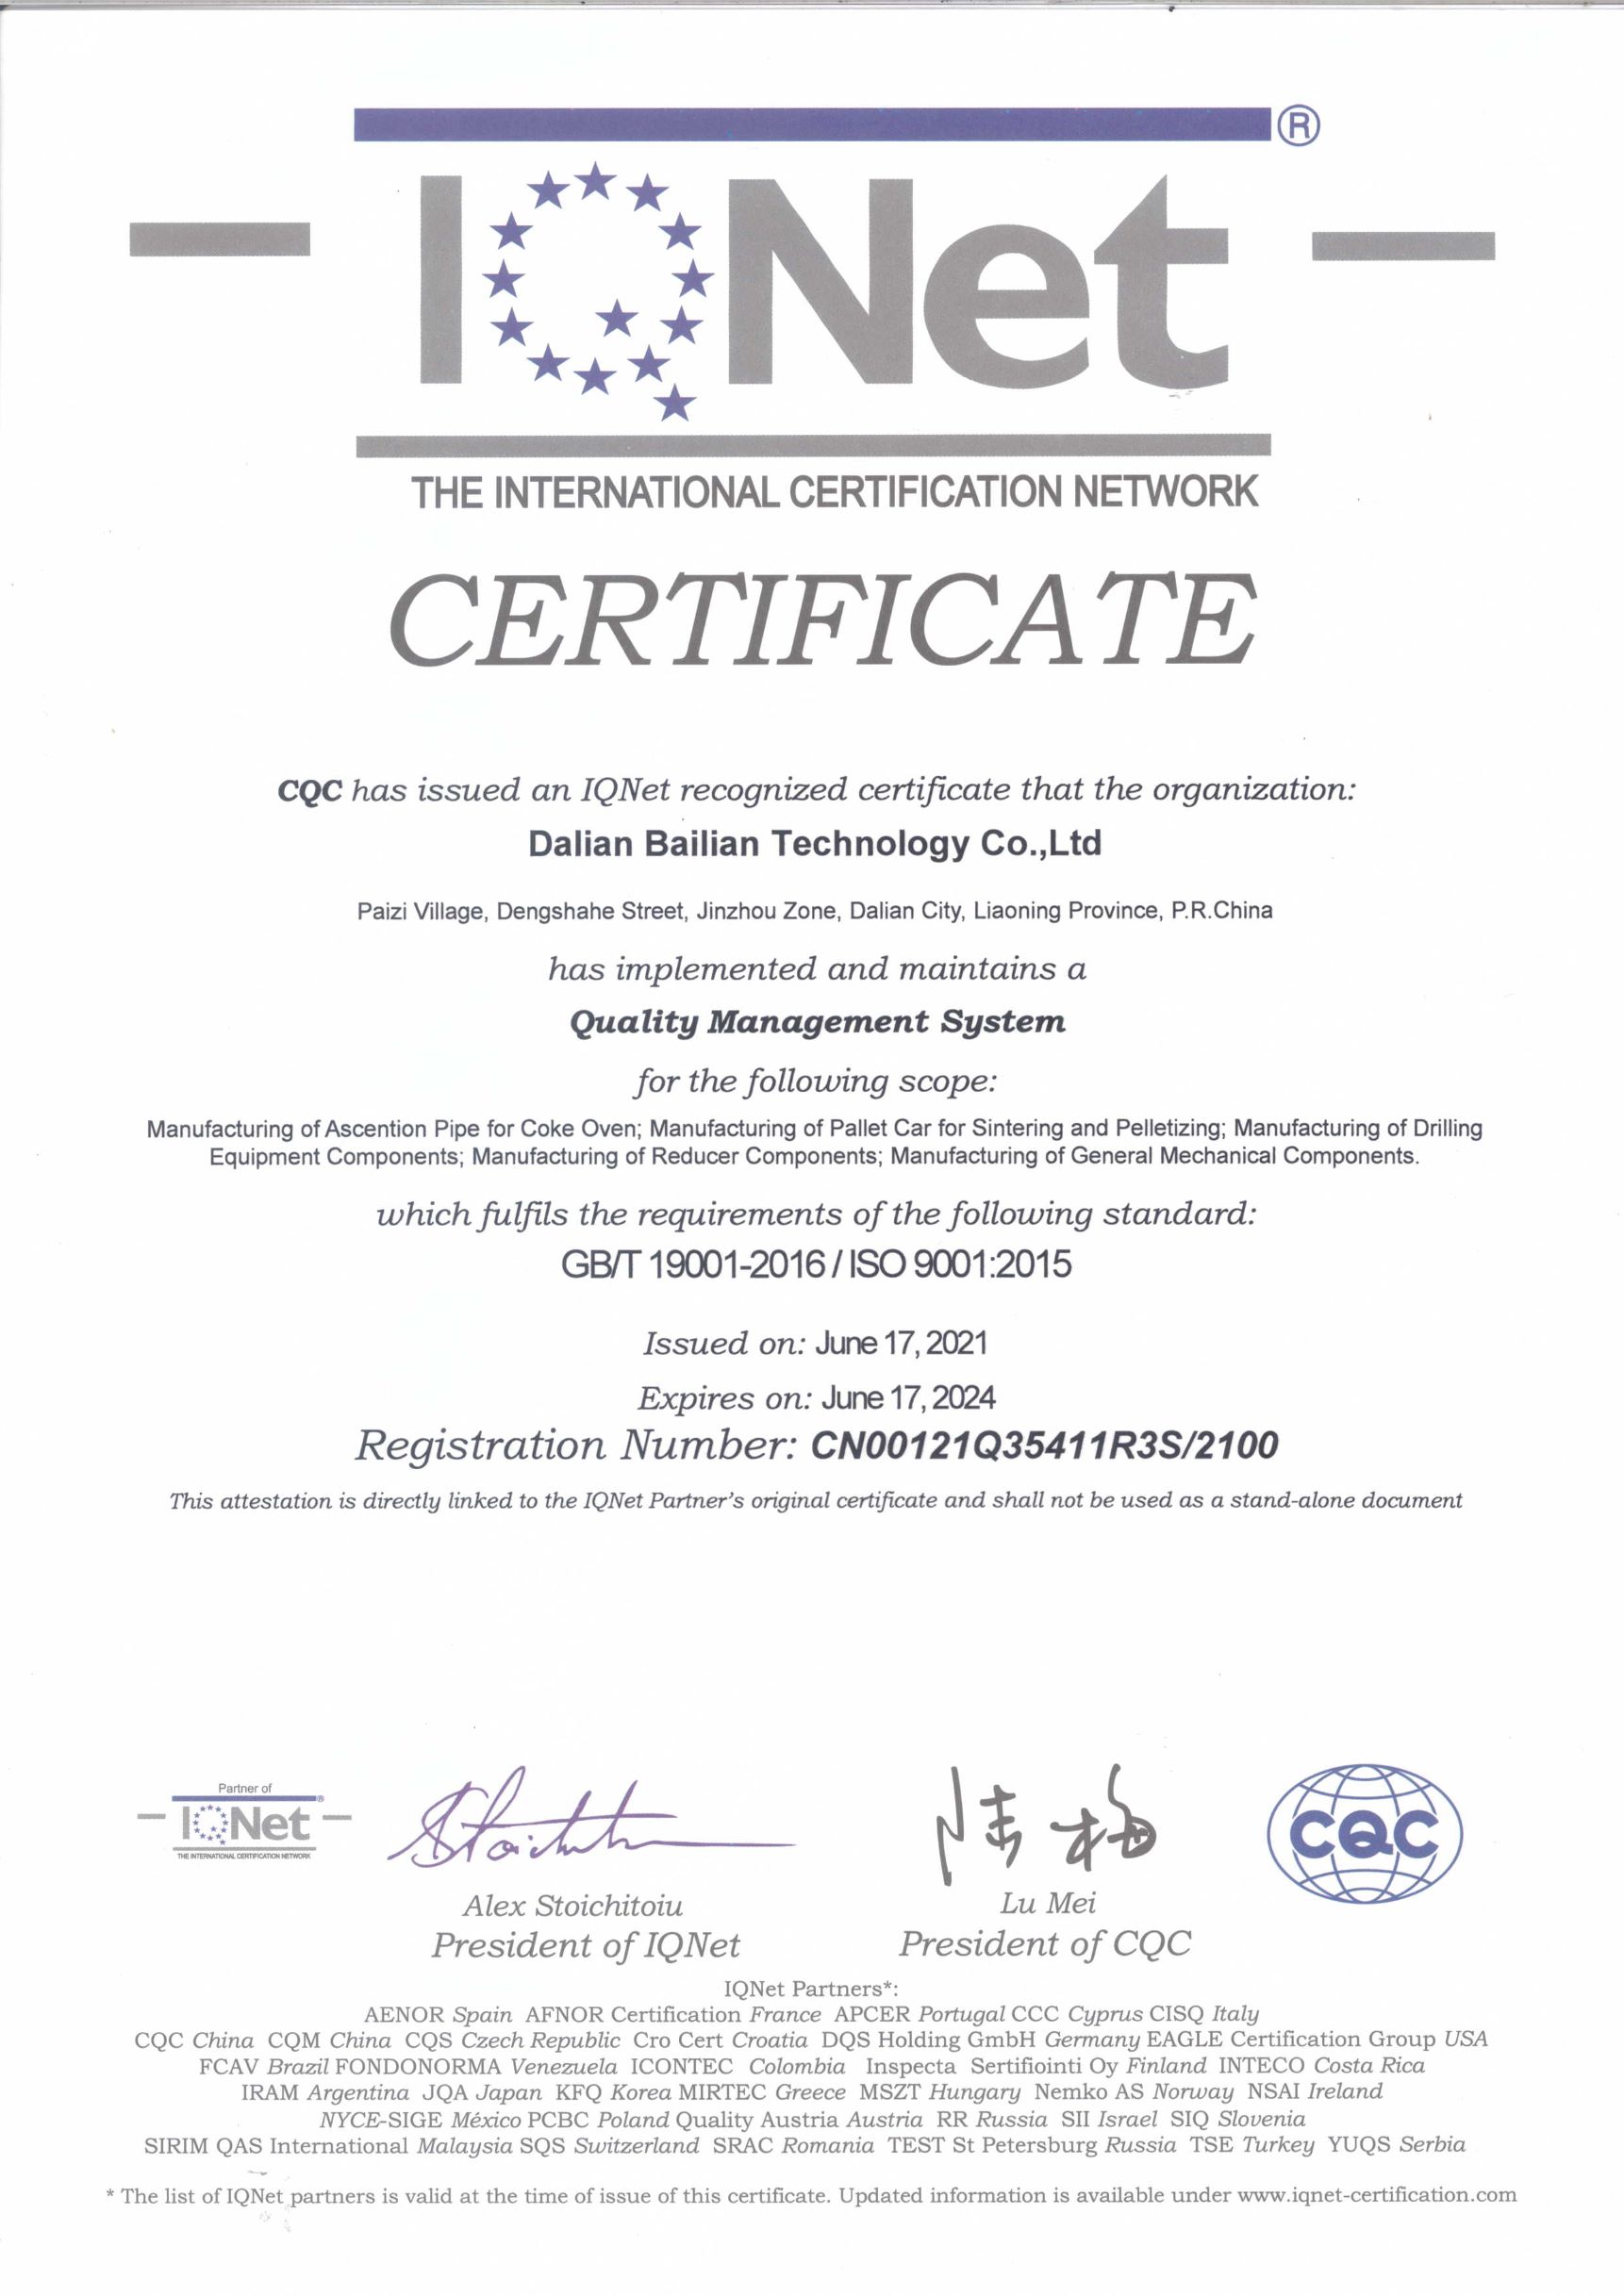  Certified  by IQNET